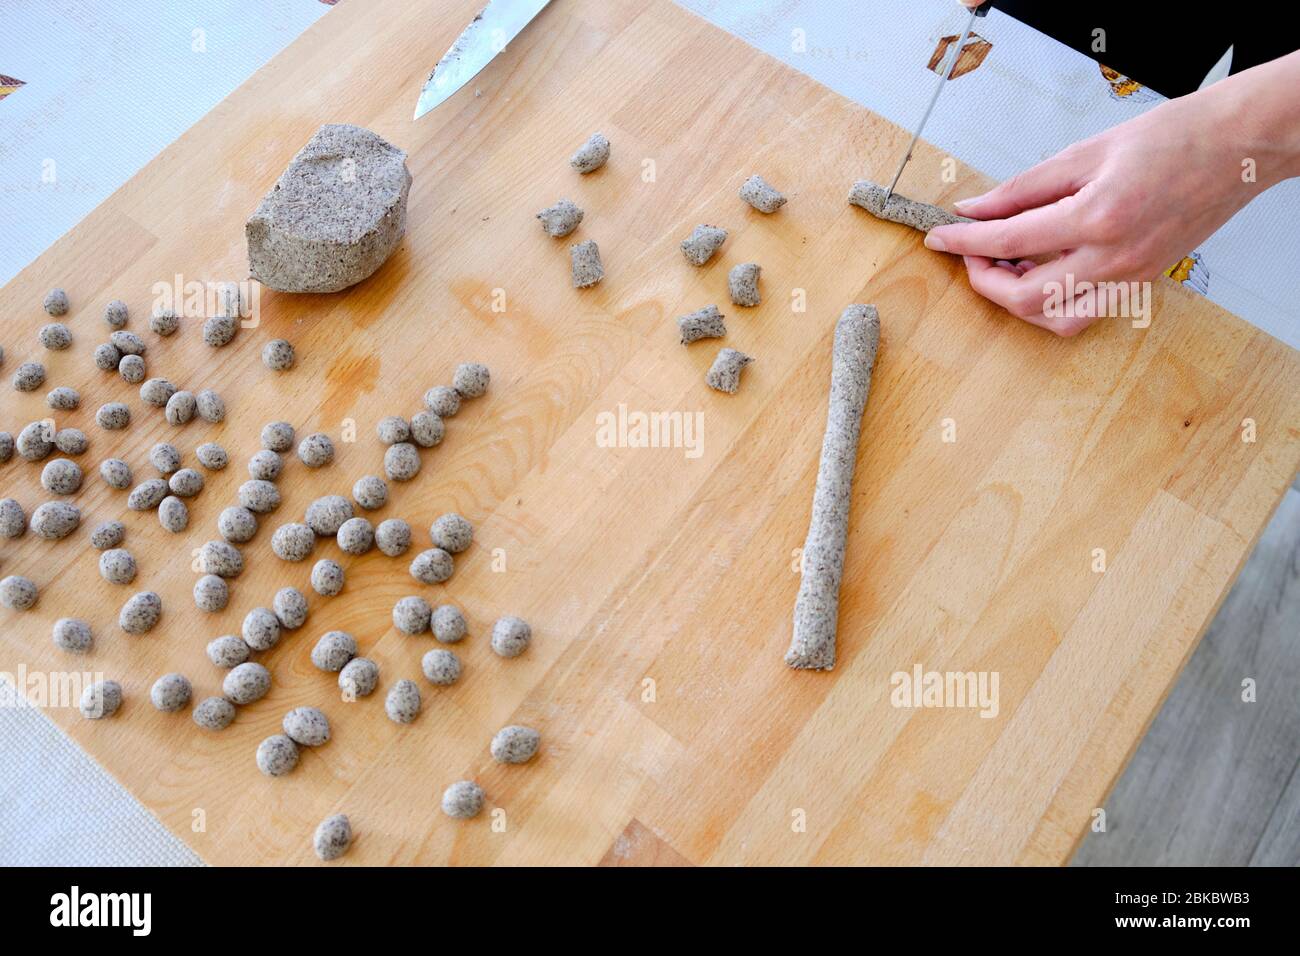 Homemade preparation of Italian gnocchi made with buckwheat flour. It is a gluten-free dish suitable for people with celiac disease. Stock Photo